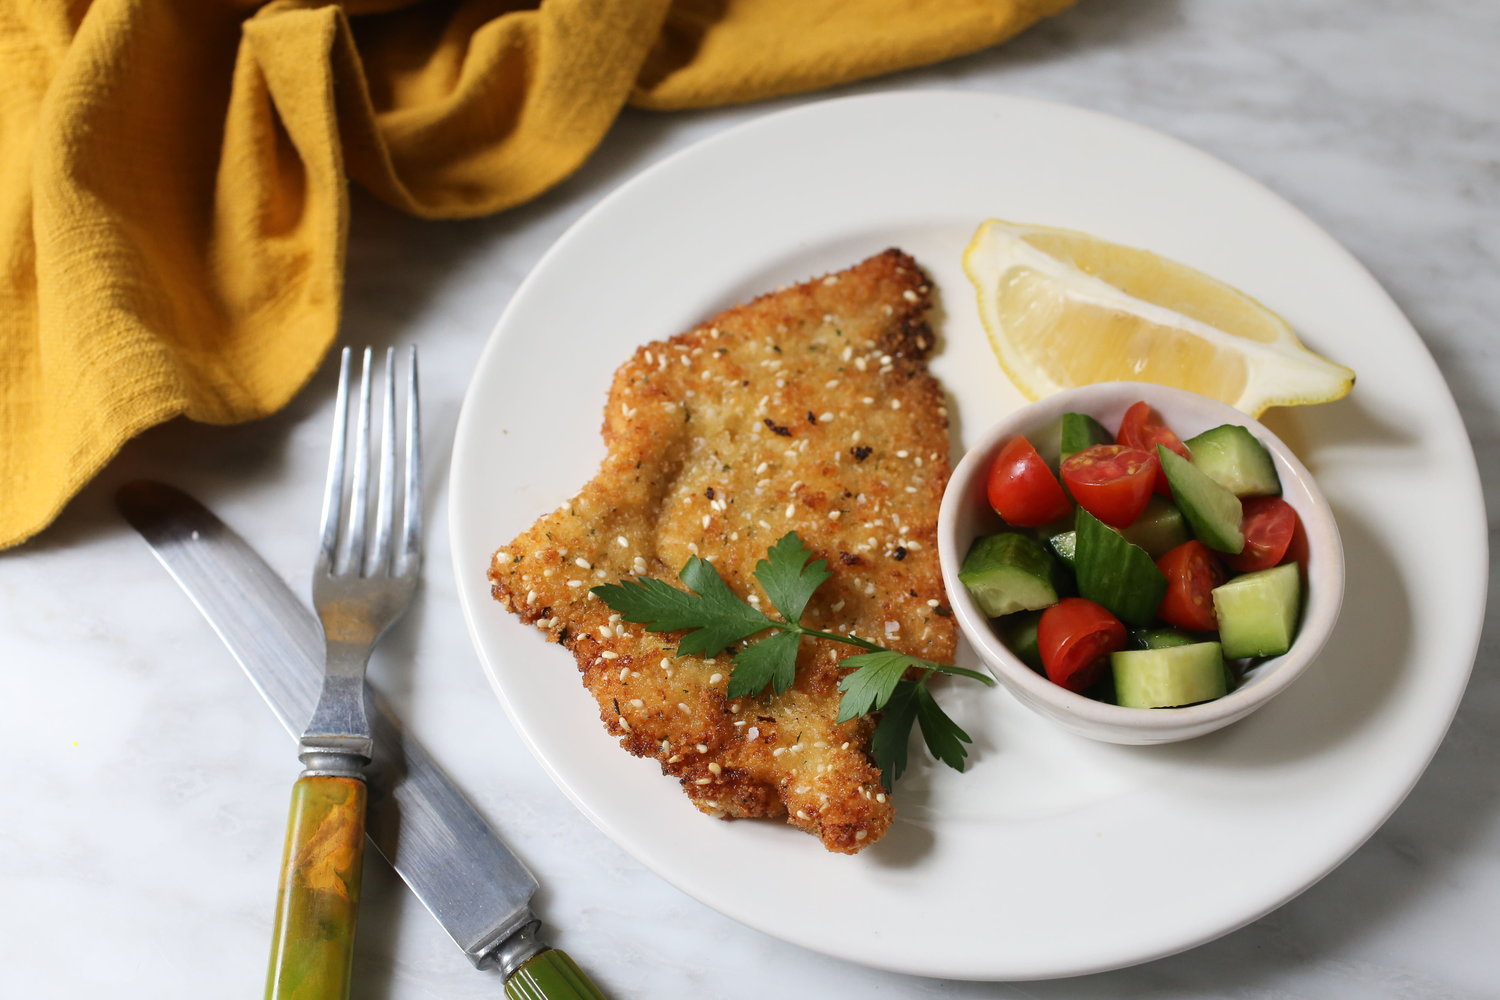 Sarna’s classic chicken schnitzel recipe was taught to her husband by his grandmother, Baba Billie. The recipe uses panko bread crumbs for extra crunch.